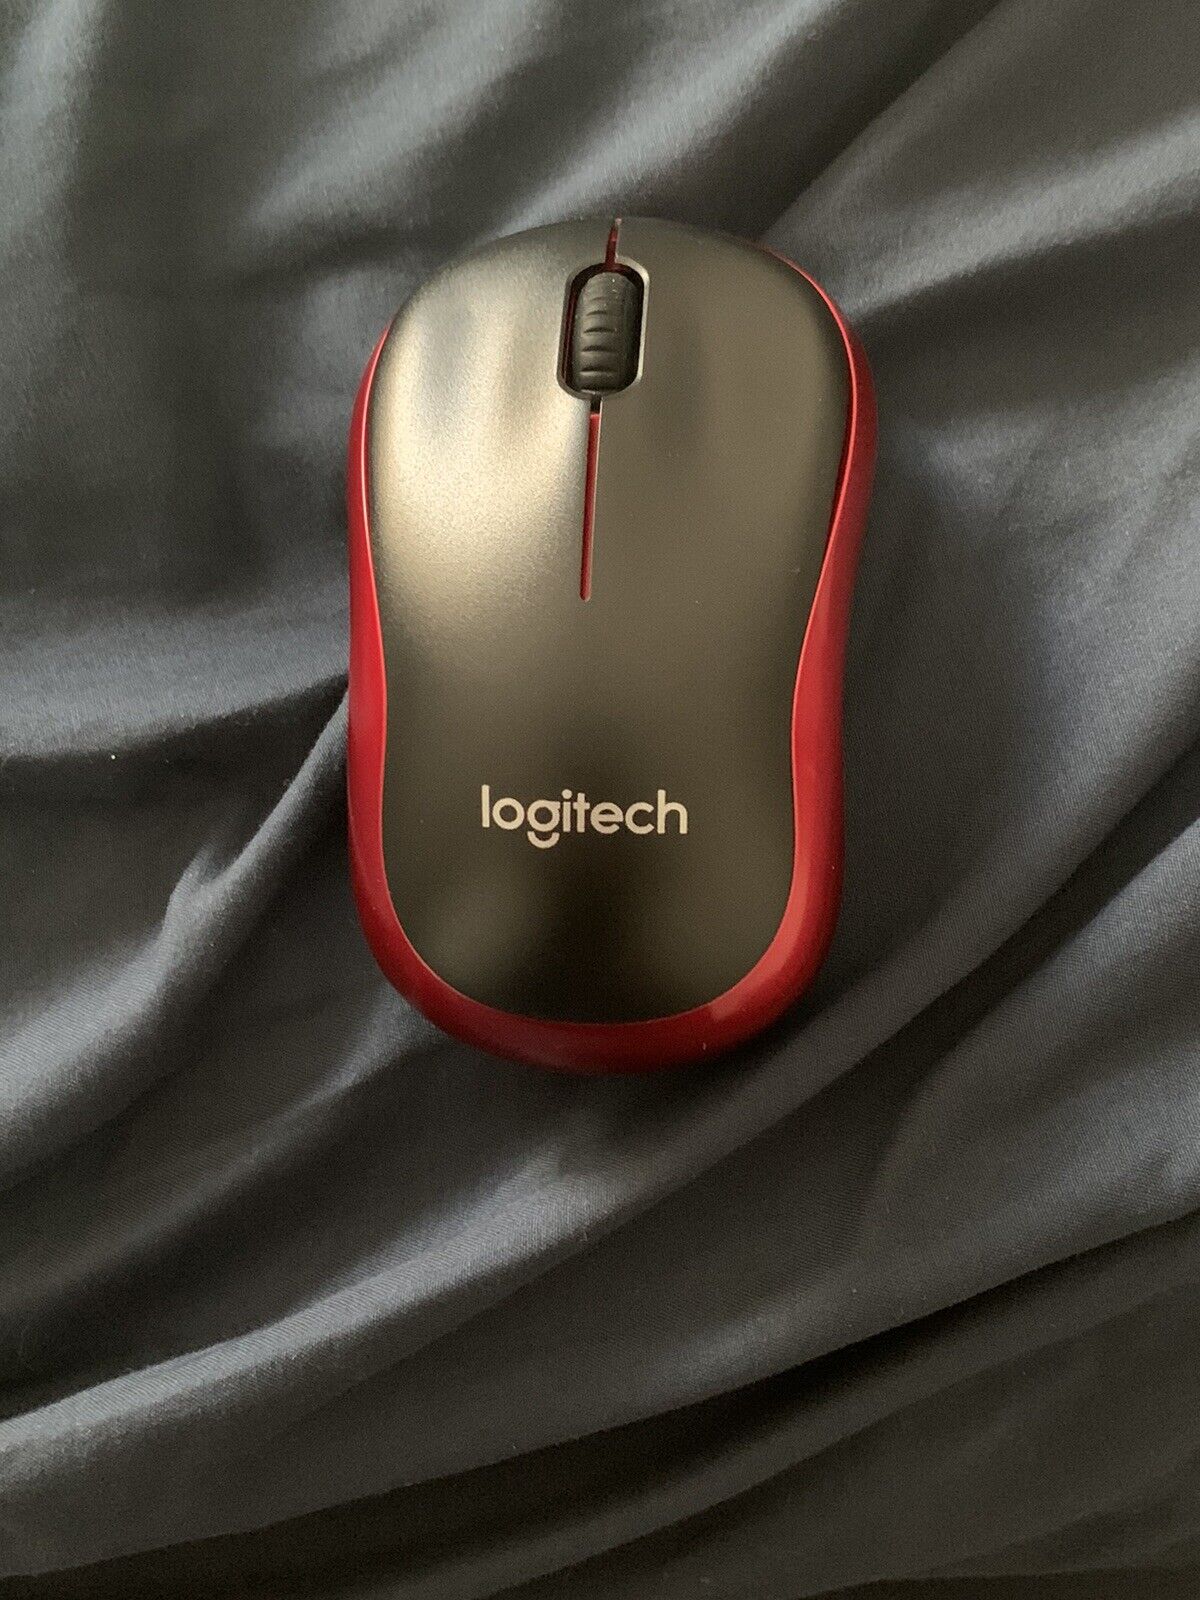 Logitech M185 Wireless Mouse, 2.4GHz Optical 1000 DPI For PC, Mac, Laptop - Red